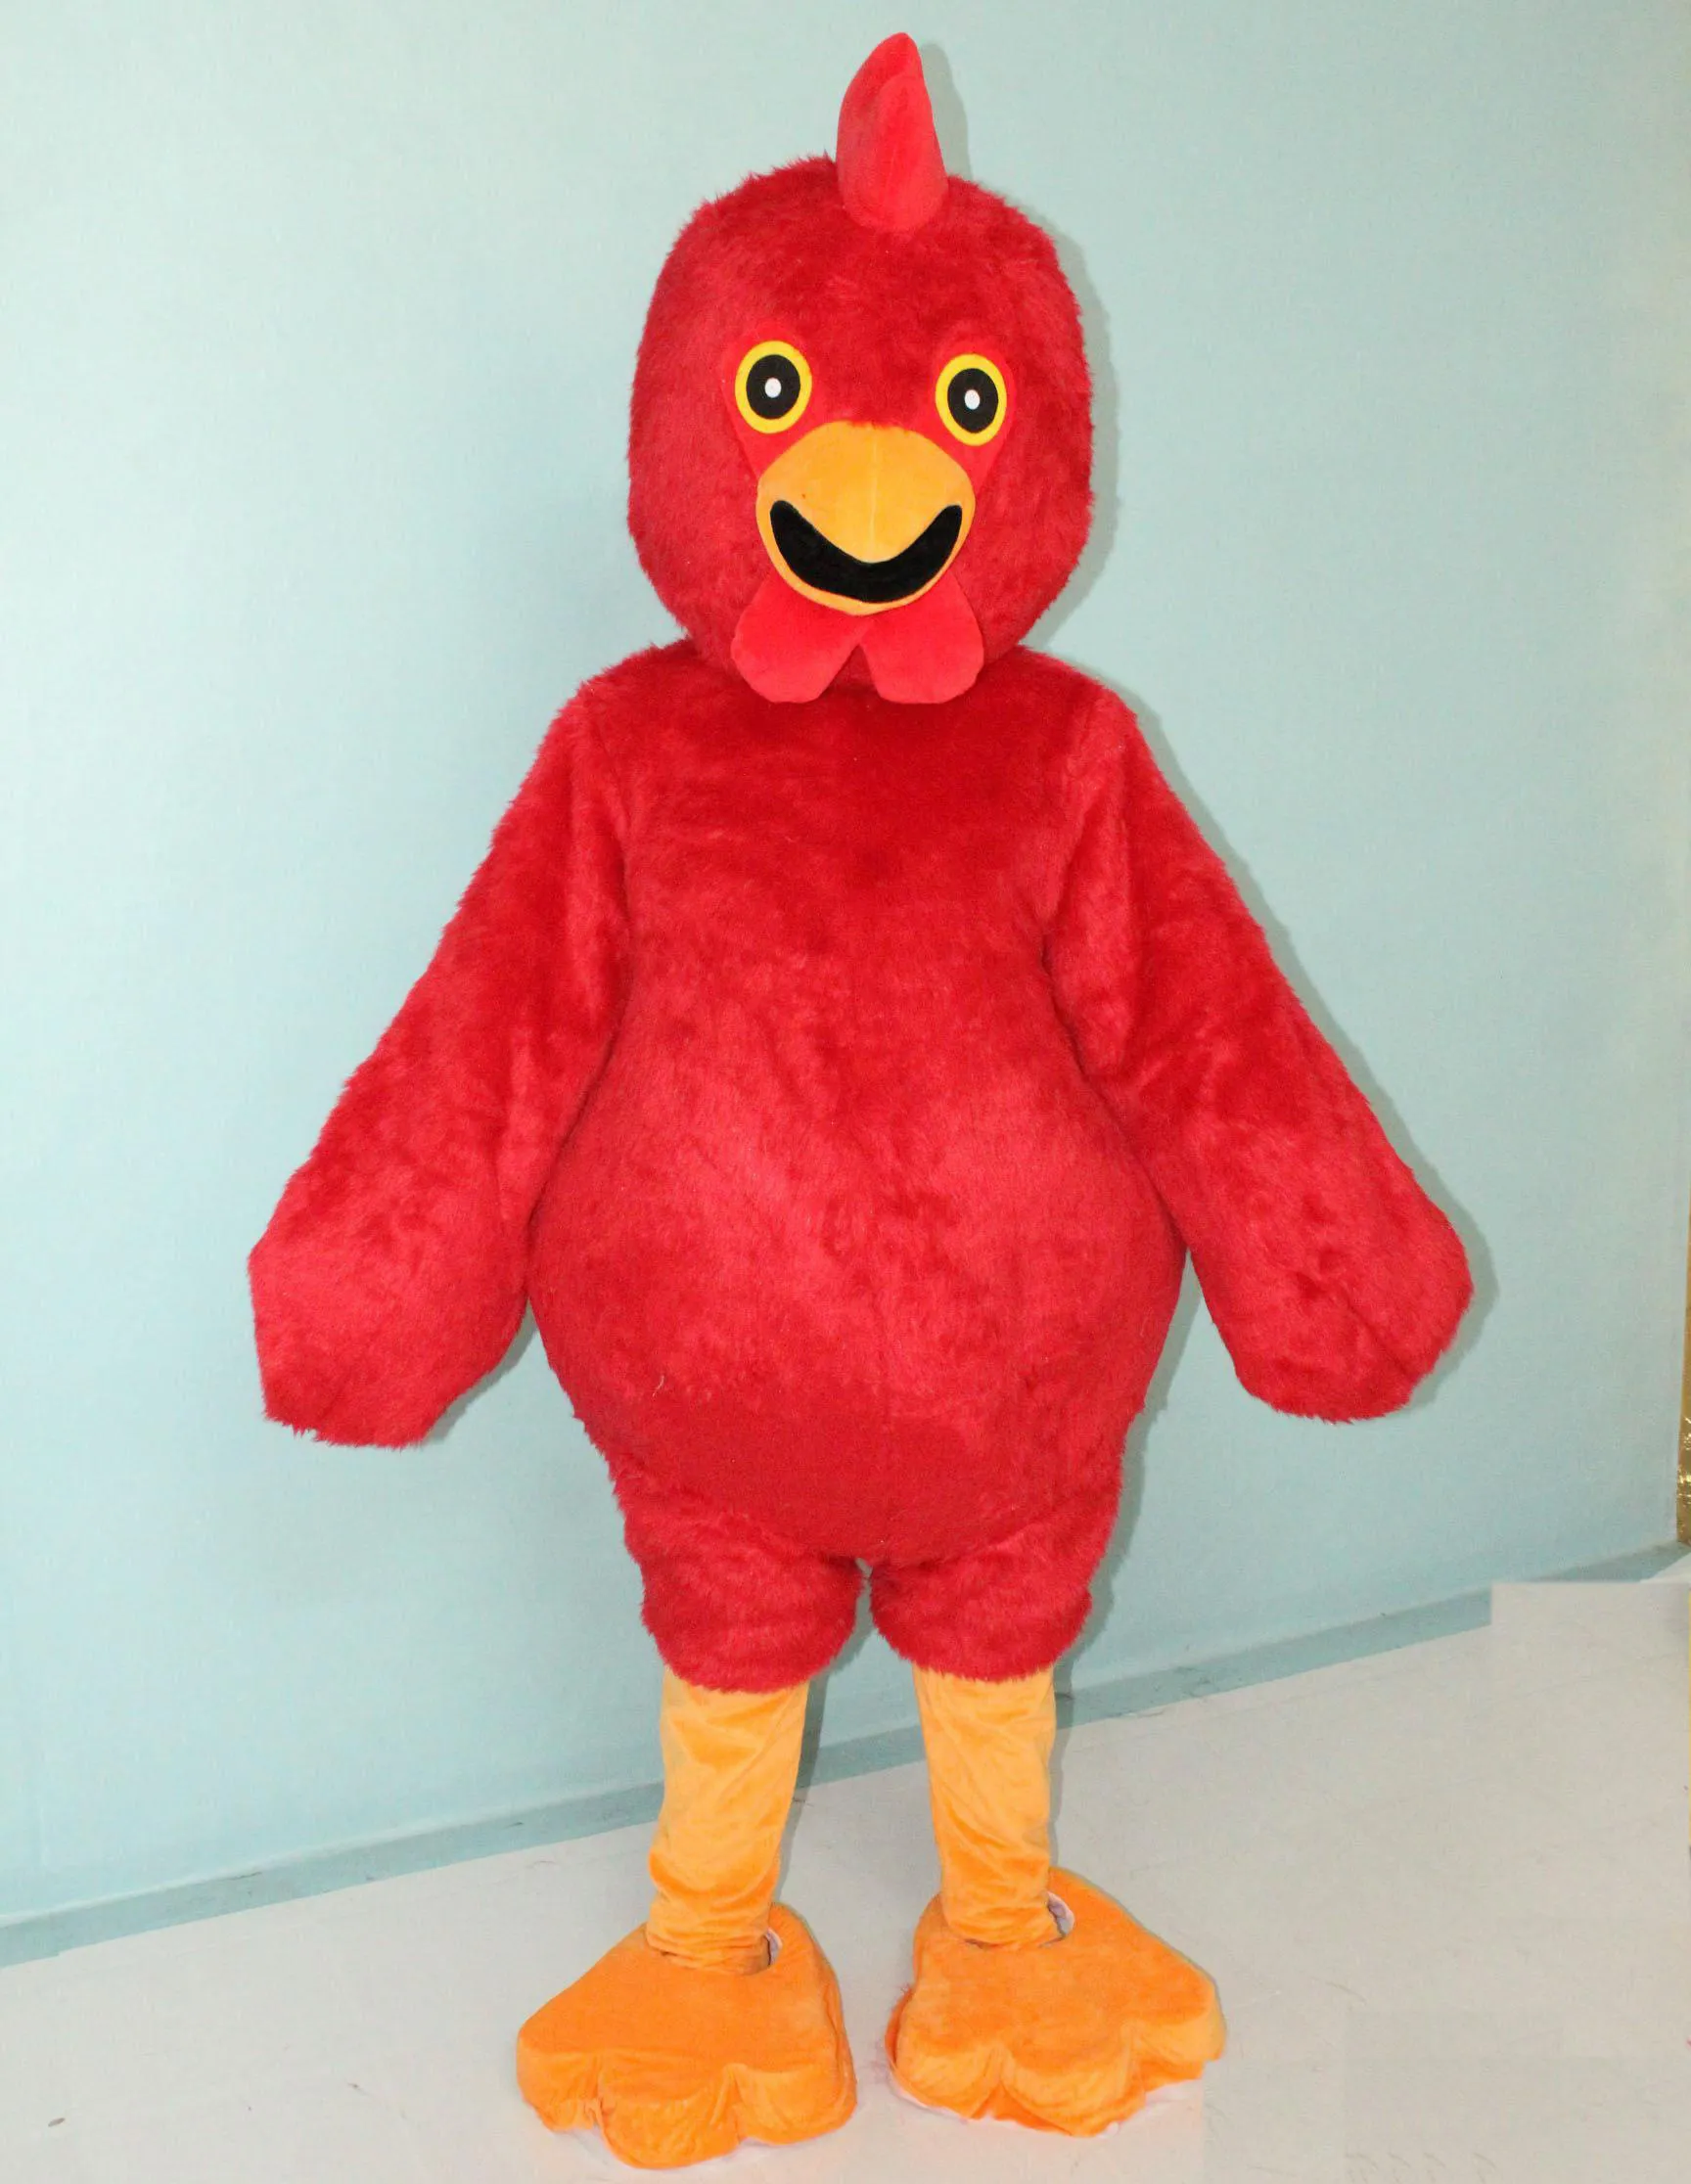 2018 hot sale red colour chicken mascot suit hen costume for adults to wear for sale